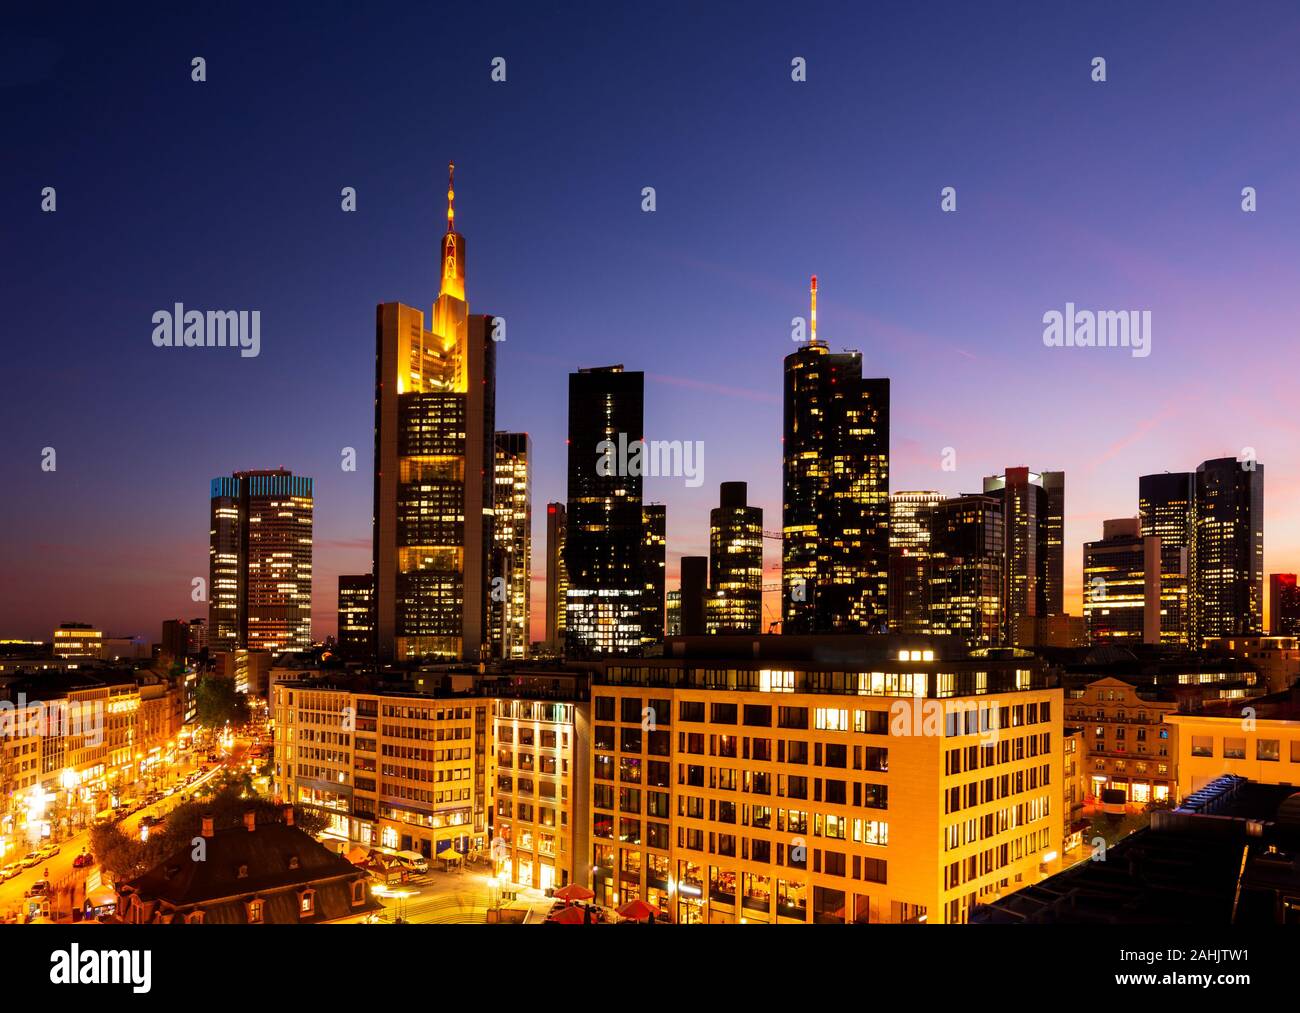 Blue hour - aerial view over over Frankfurt at night Stock Photo